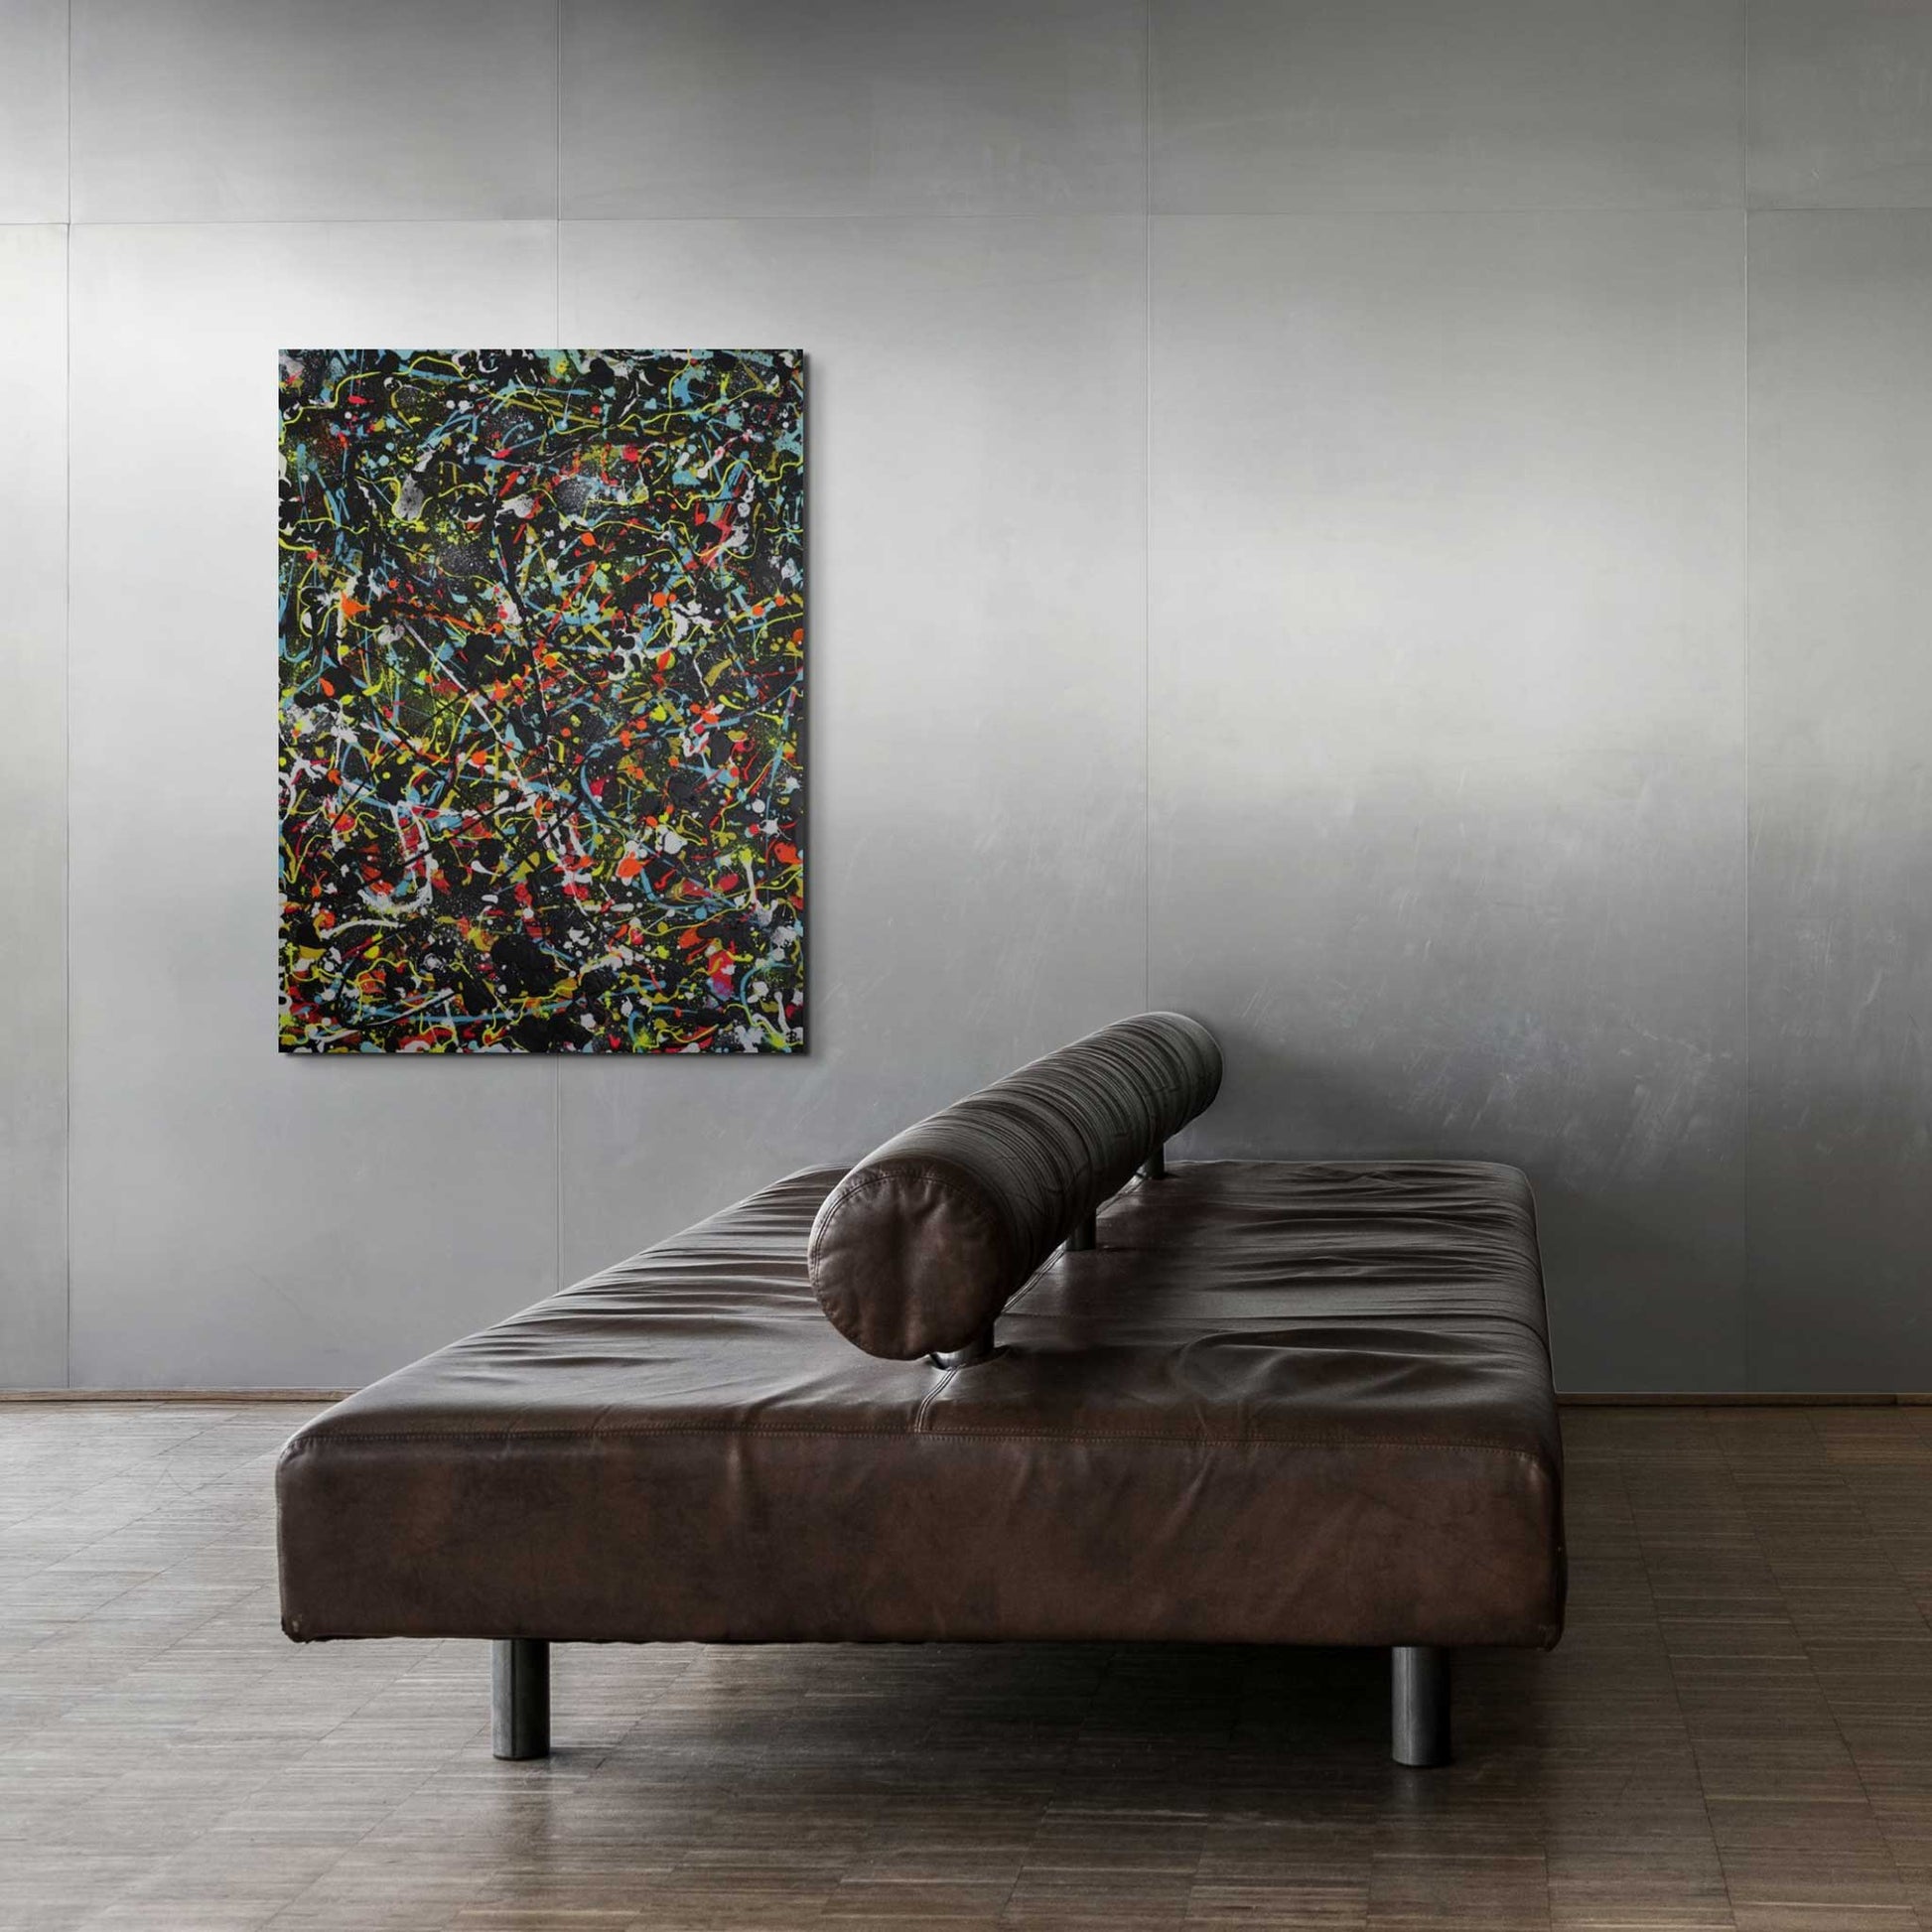 Onyx, original abstract painting seen hanging in minimalist space on concrete wall with brown leather sofa. Art by Bridget Bradley